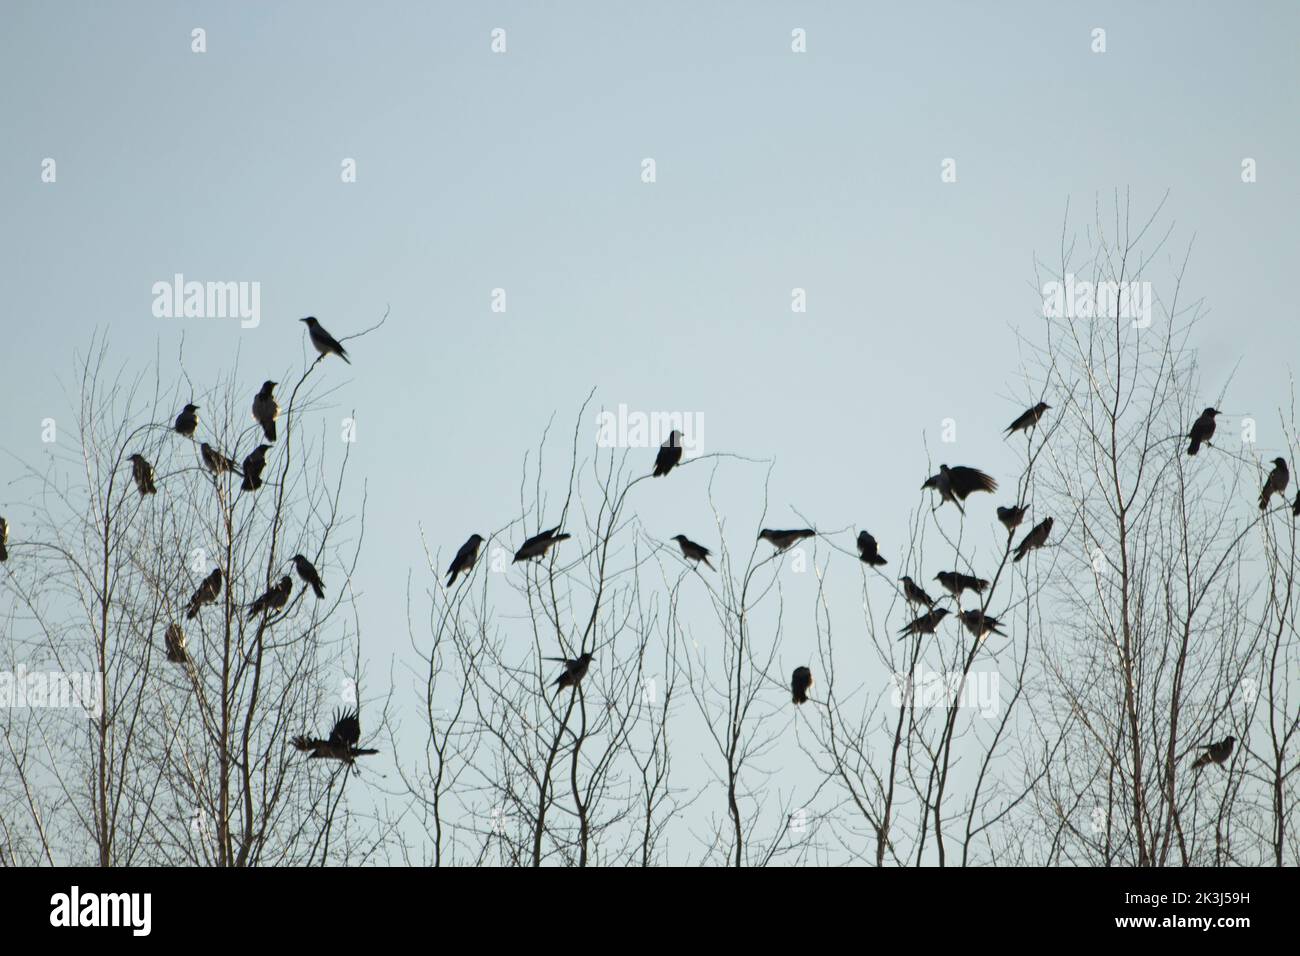 Crows on tree. Lots of birds on branches of tree. Black crows against sky. Stock Photo